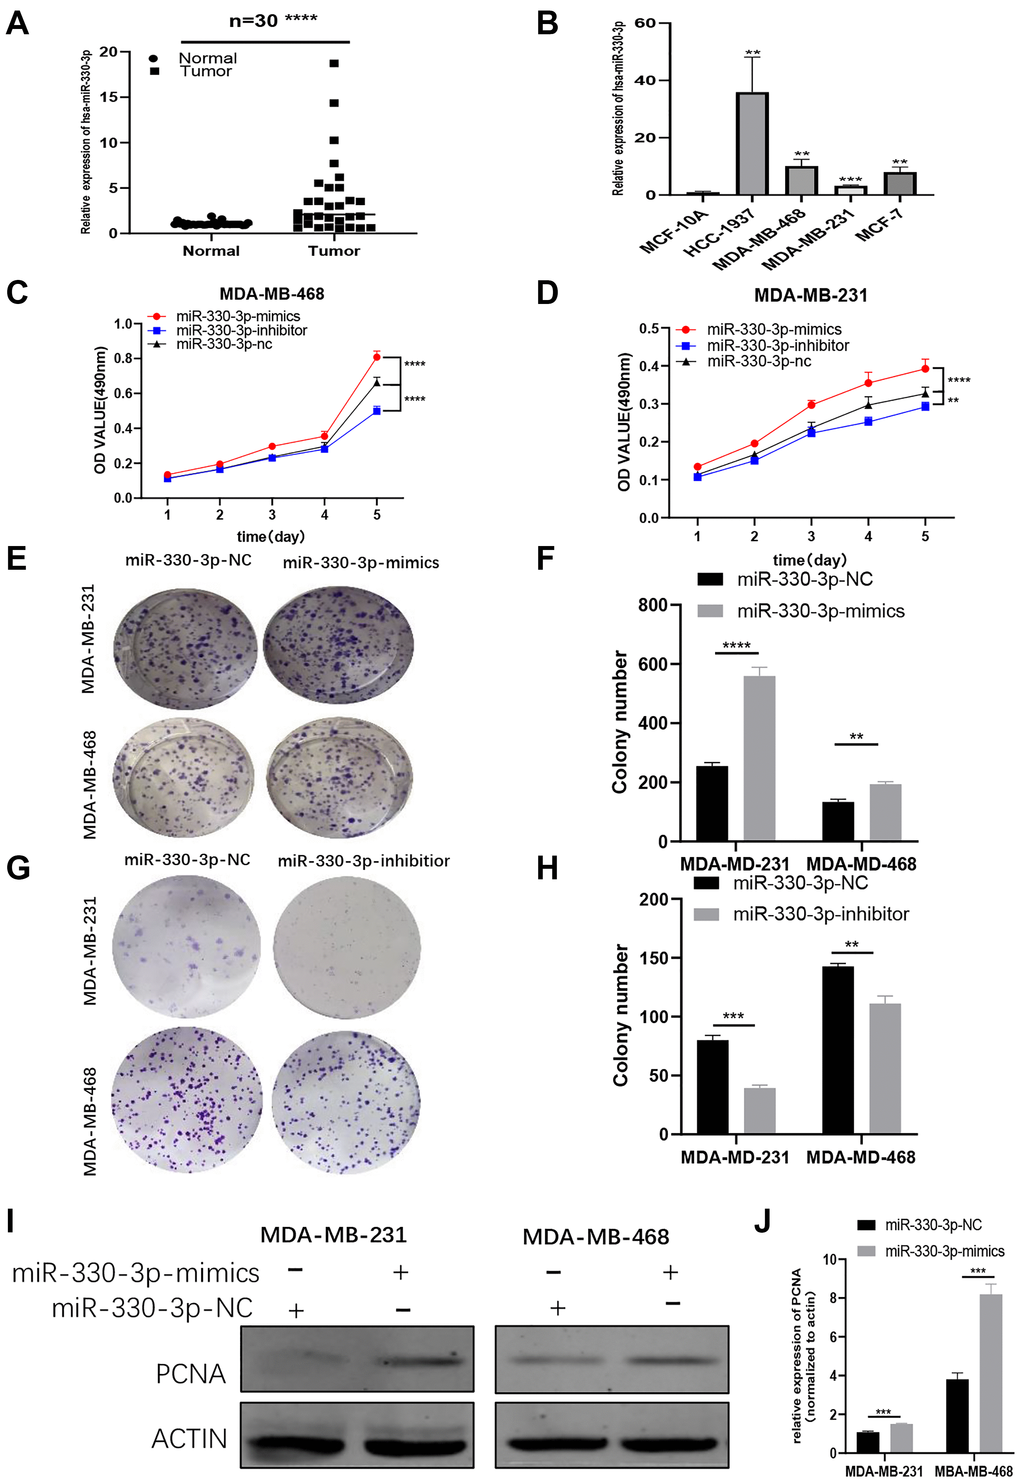 MiR-330-3p highly expresses and acts as an oncogene in BC cells. (A–B) QRT-PCR assays revealed miR-330-3p expression in BC patient tissues and BC cell lines. (C–H) MTT assays and colony formation assays were performed in MDA-MB-231 and MDA-MB-468 cell lines to determine the effect of miR-330-3p-inhibitor and miR-330-3p-mimics on proliferation. (I–J) Effect of miR-330-3p-mimics on proliferation in MDA-MB-231 and MDa-MB-468 cells by western blot. (*p **p ***p ****p 